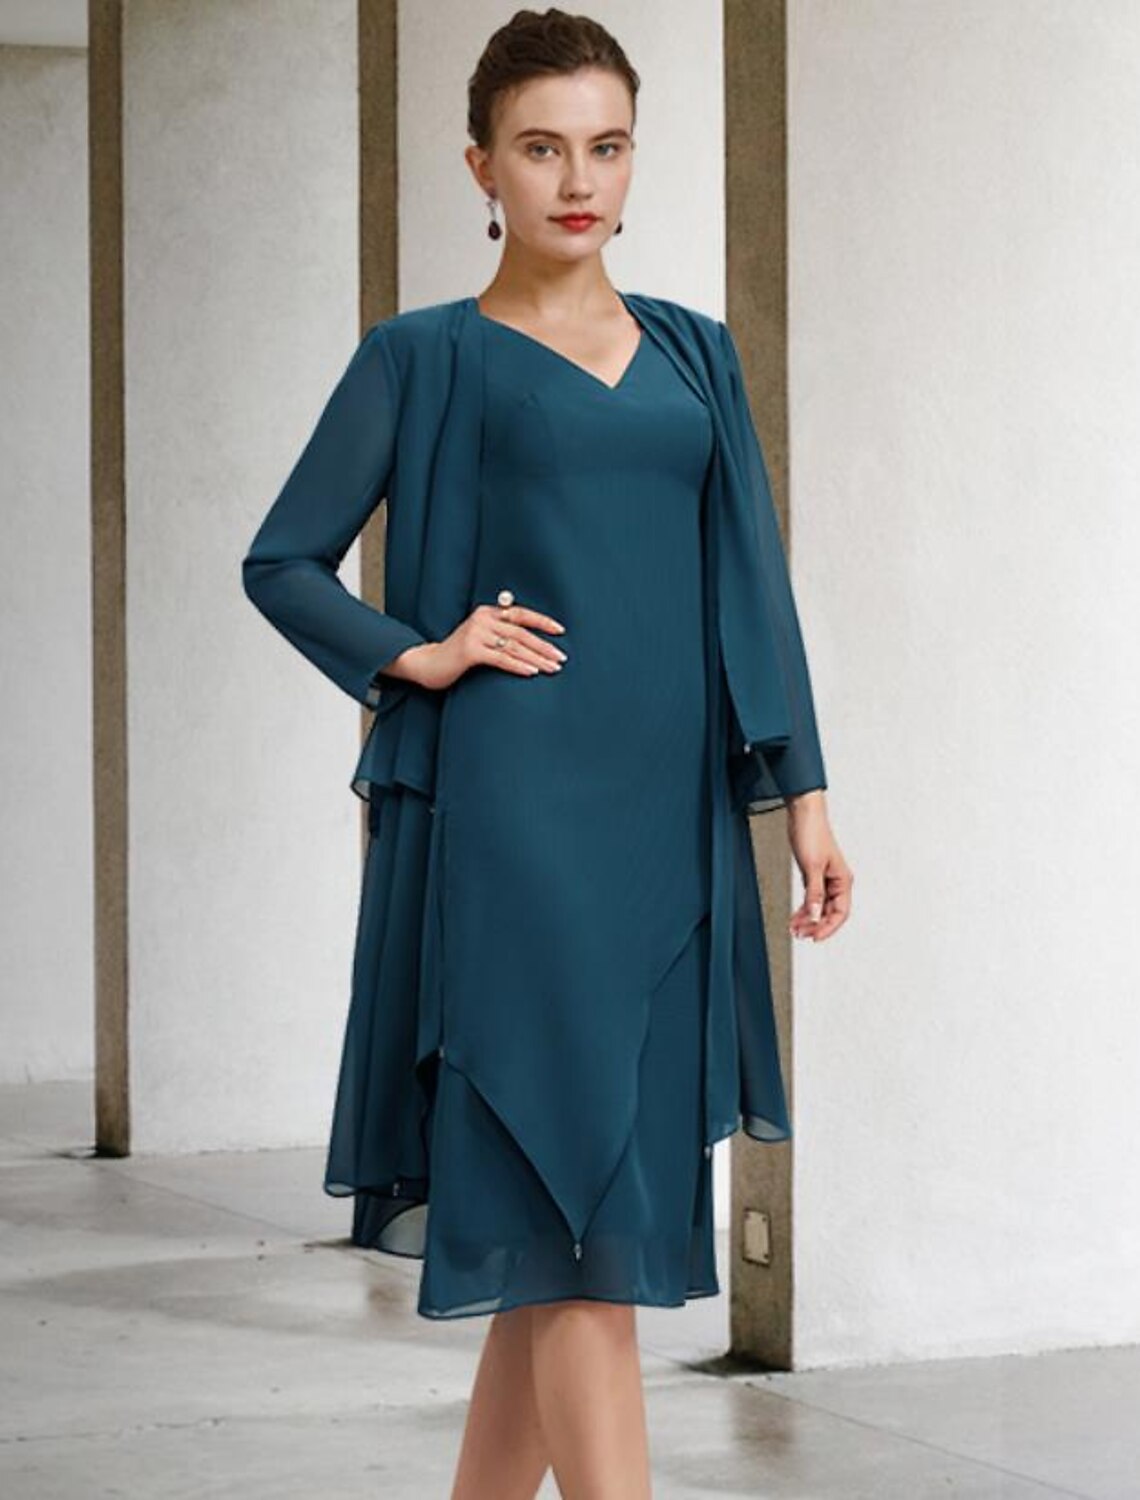 Two Piece Sheath / Column Mother of the Bride Dress Church Vintage Elegant V Neck Knee Length Chiffon Sleeveless Wrap Included Jacket Dresses with Draping Tier